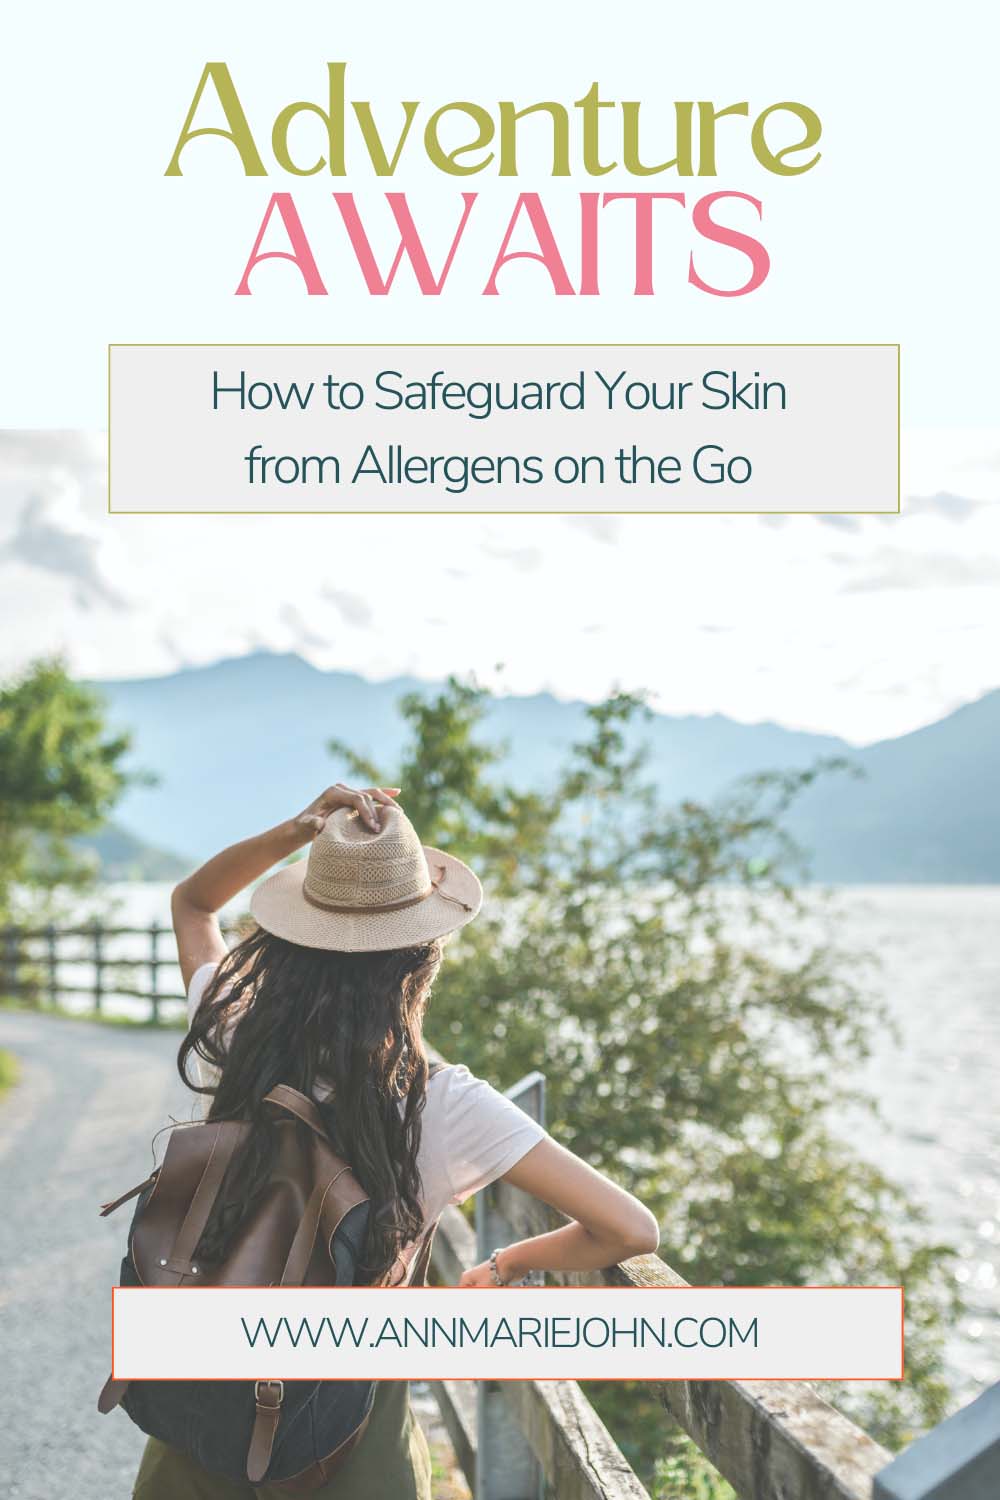 How to Safeguard Your Skin from Allergens on the Go